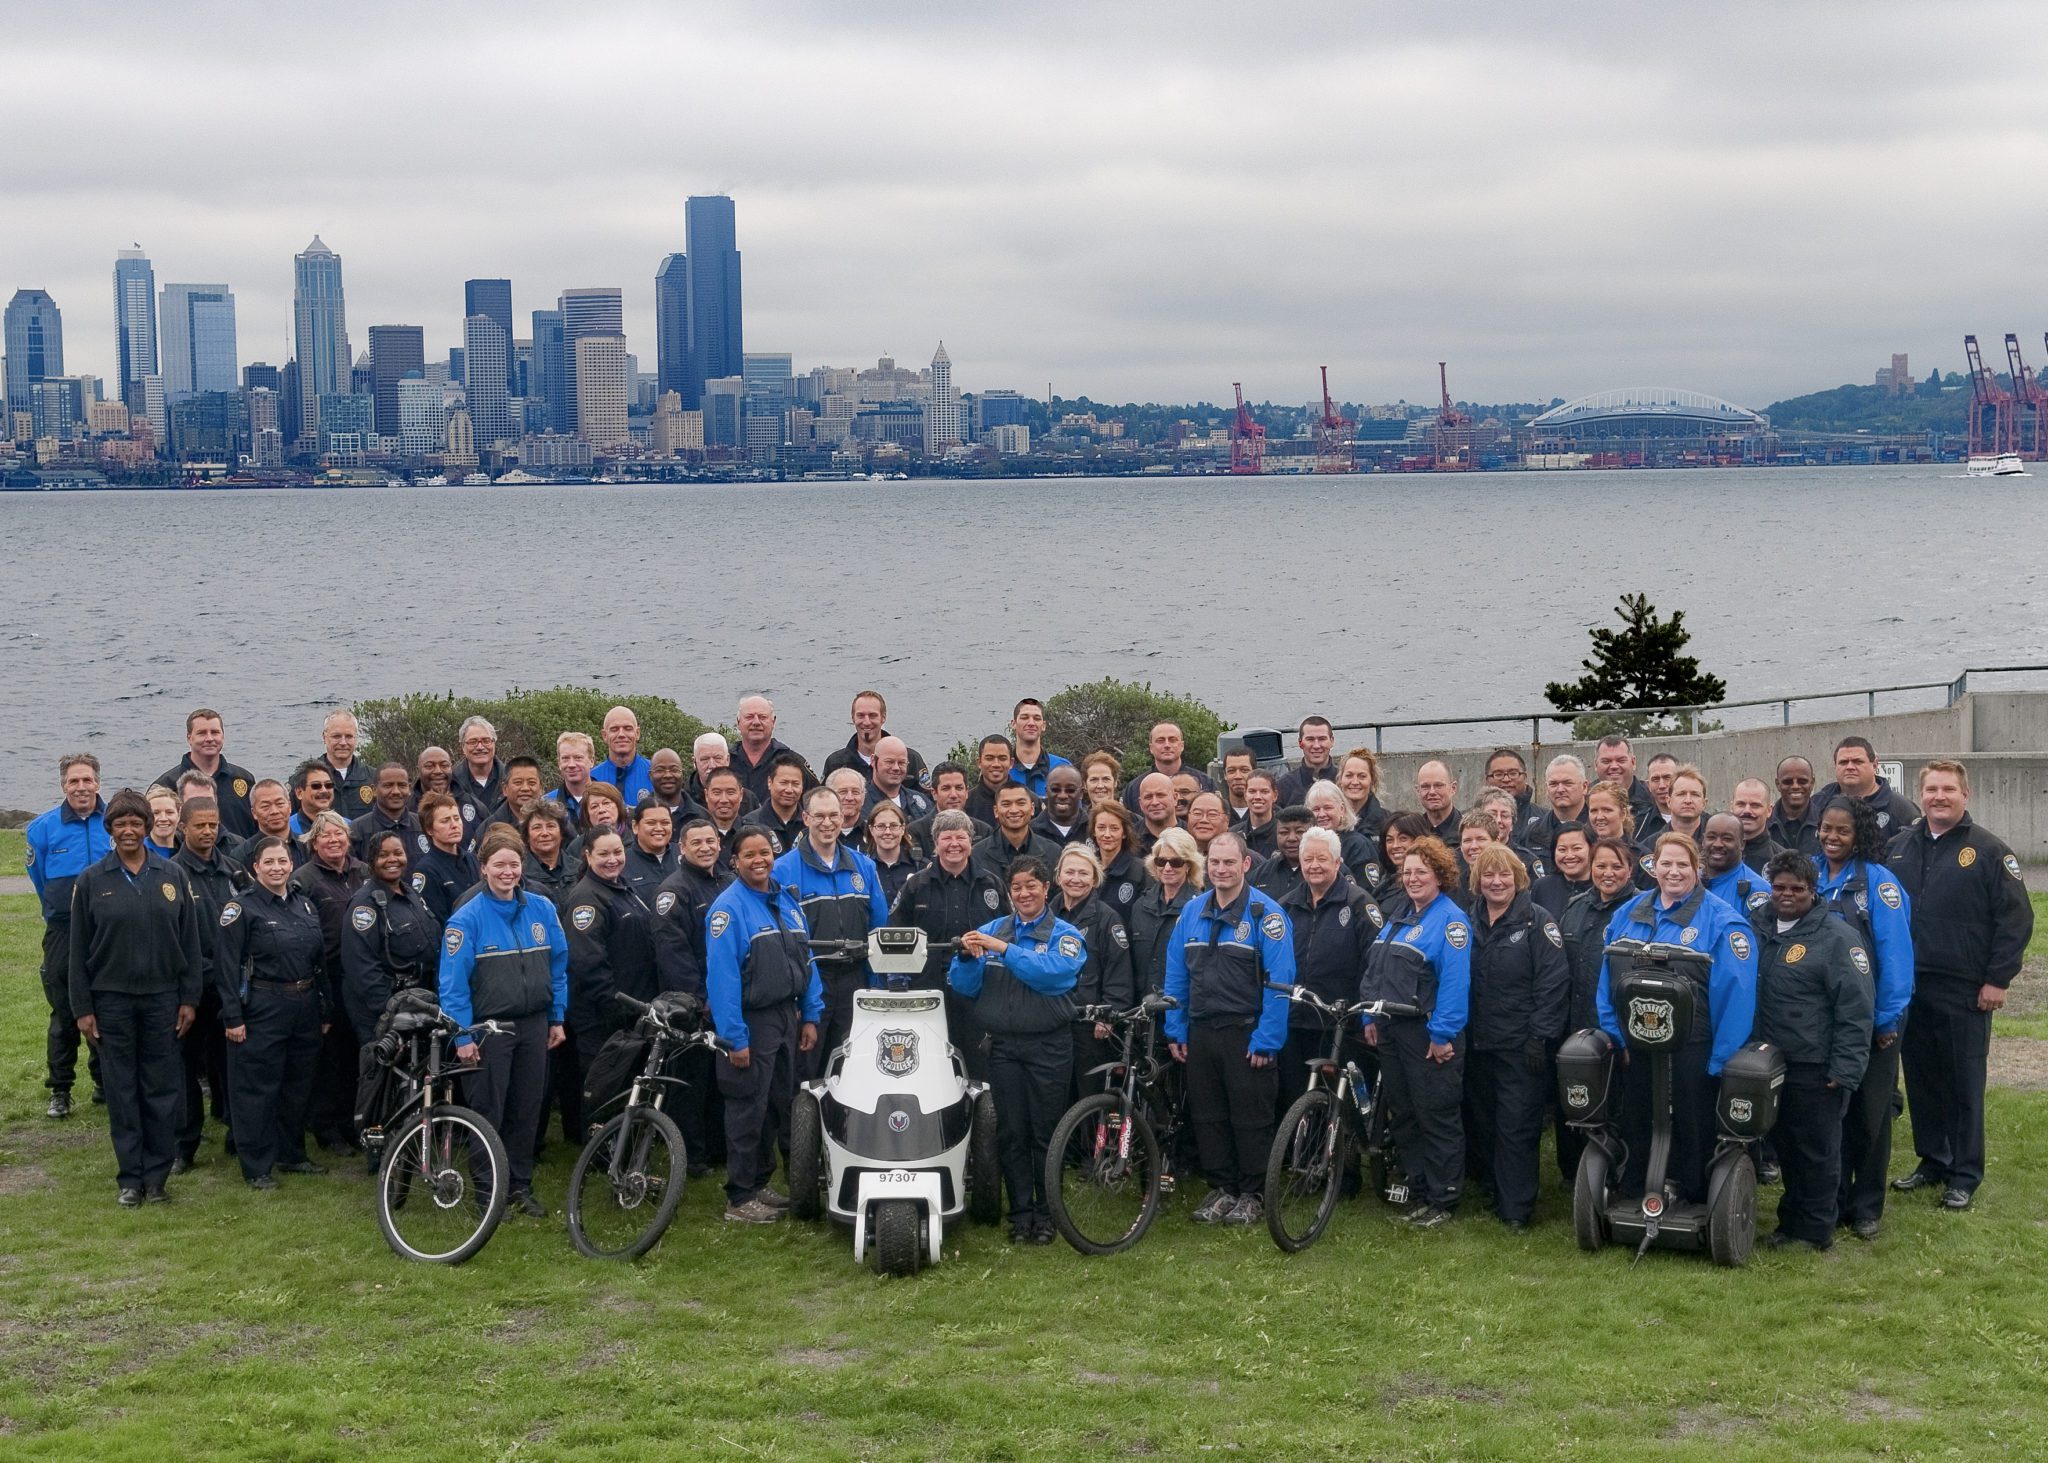 The Seattle Parking Enforcement team poses for a group photo in 2019, with the downtown Seattle skyline visible in the background.